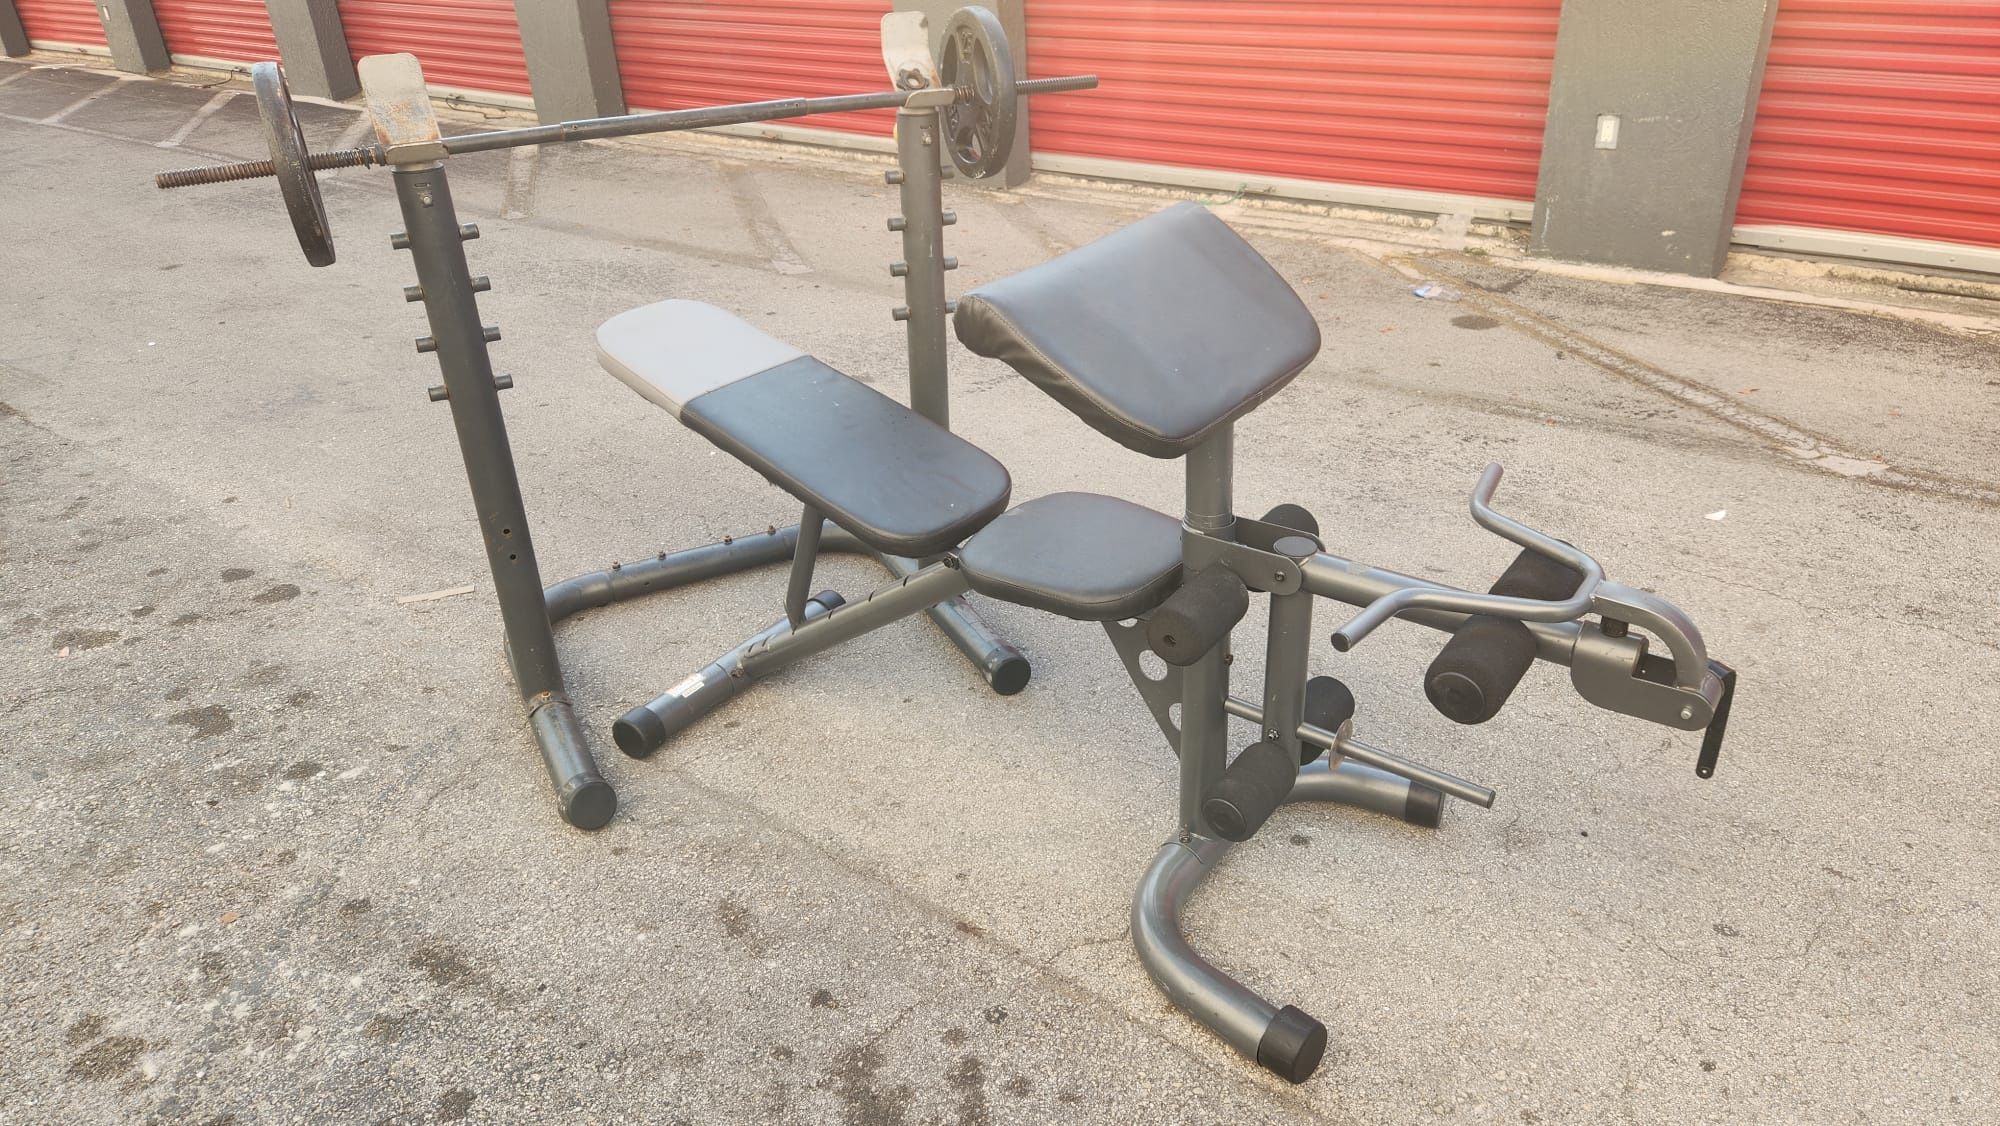 Home Gym Adjustable Bench with Bar and Plates